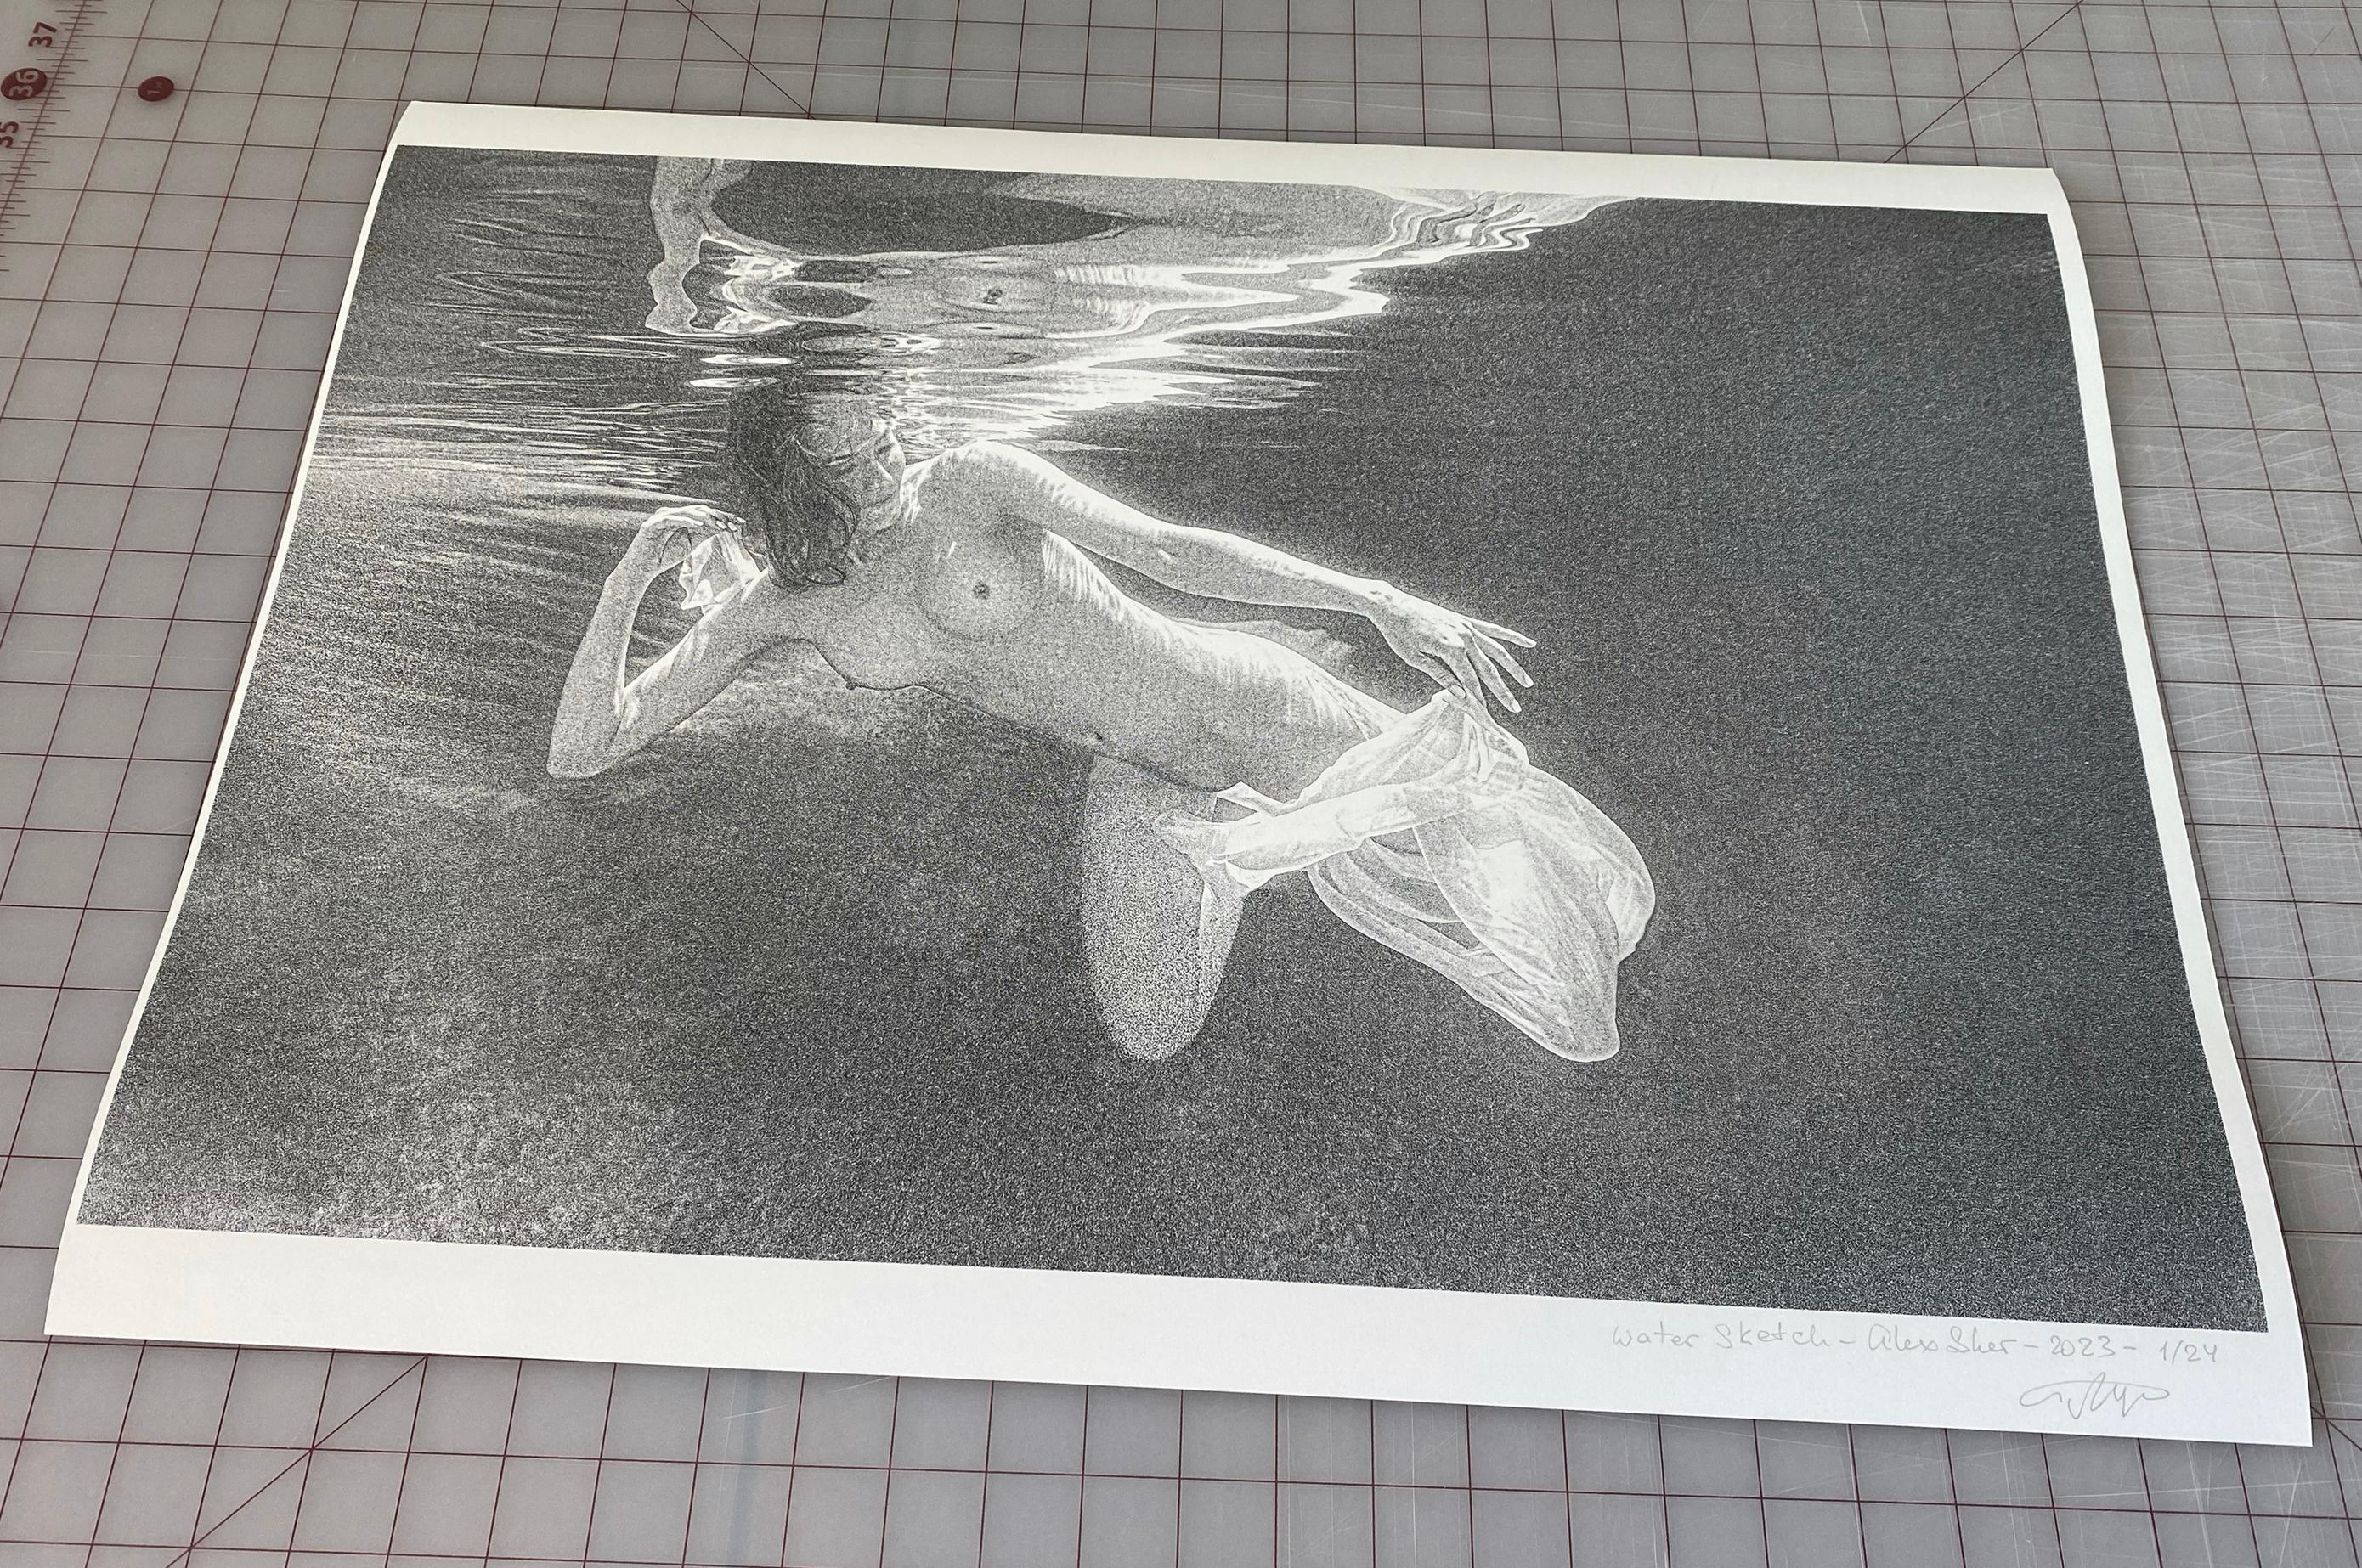 Underwater black and white photograph of a young naked woman diving in a pool. The photograph is printed with high grain texture - as you may see on close up fragments.

Original gallery quality archival pigment print on archival 16 mil (300 g/m2)